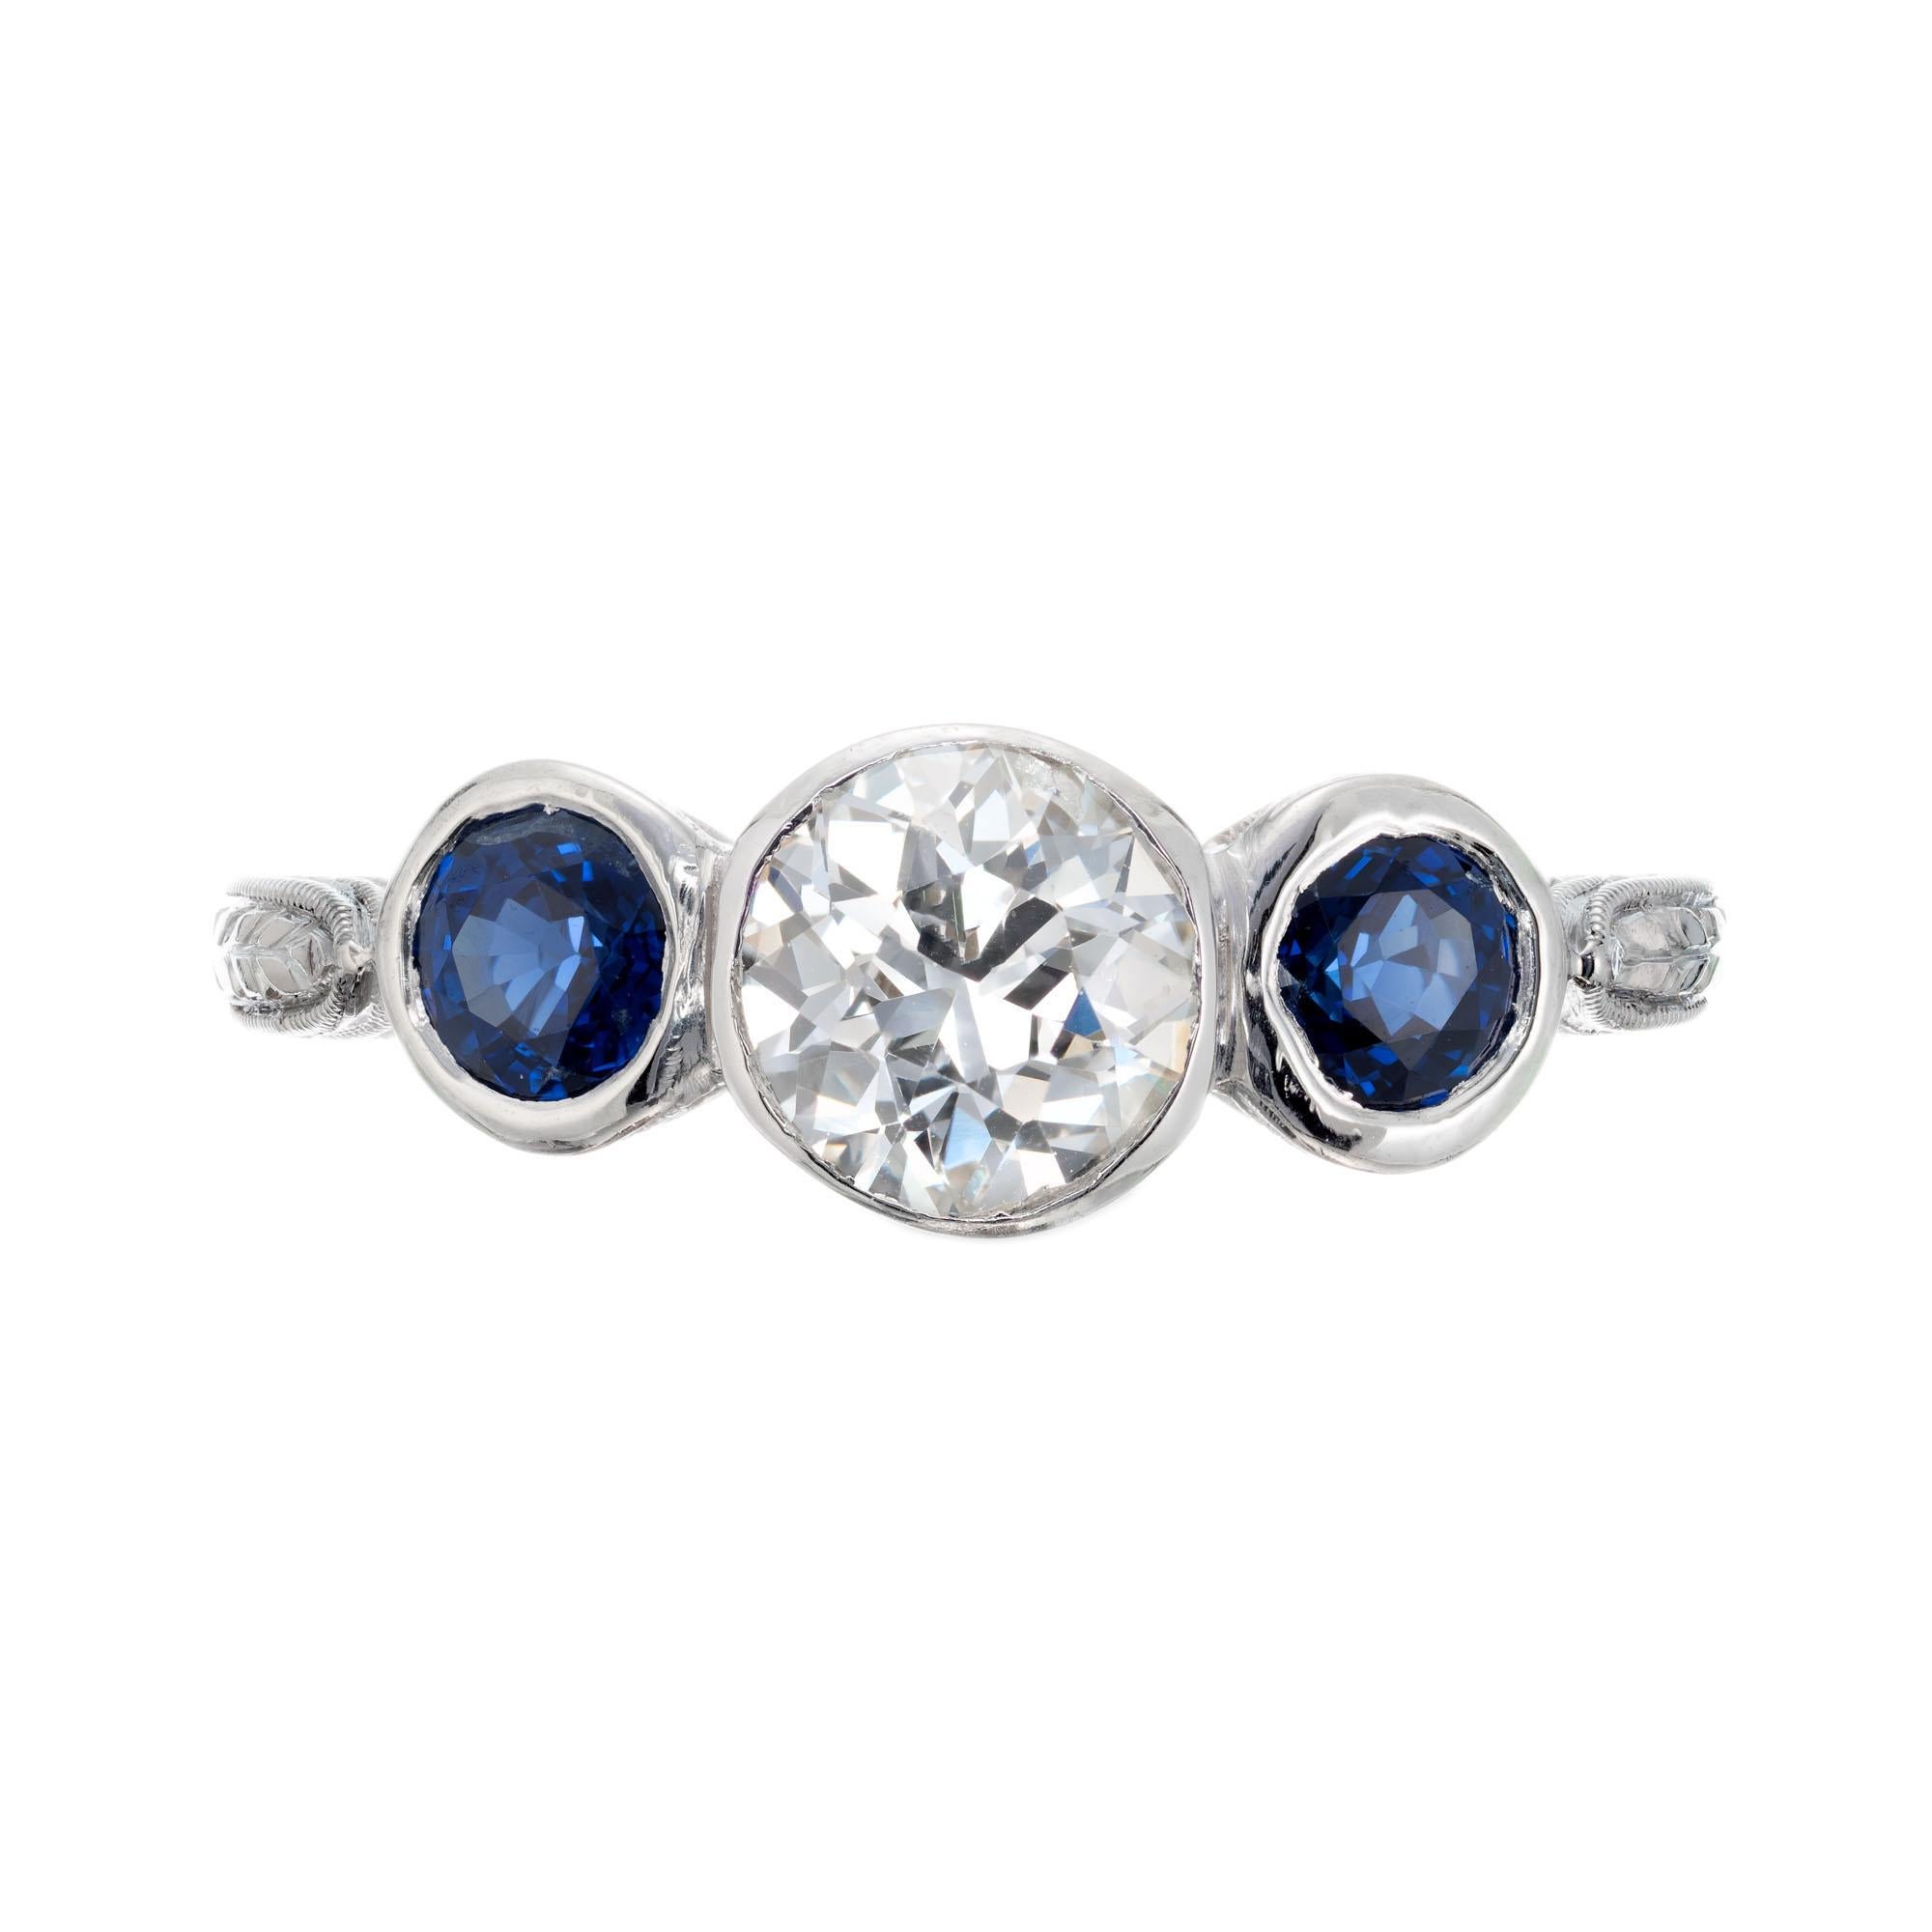 1920’s Art Deco diamond and sapphire engagement ring. EGL certified Old European cut diamond with two round sapphires in a three-stone hand pierced, engraved platinum setting. 

1 old European cut diamond, approx. total weight .77cts  H – I, SI3.